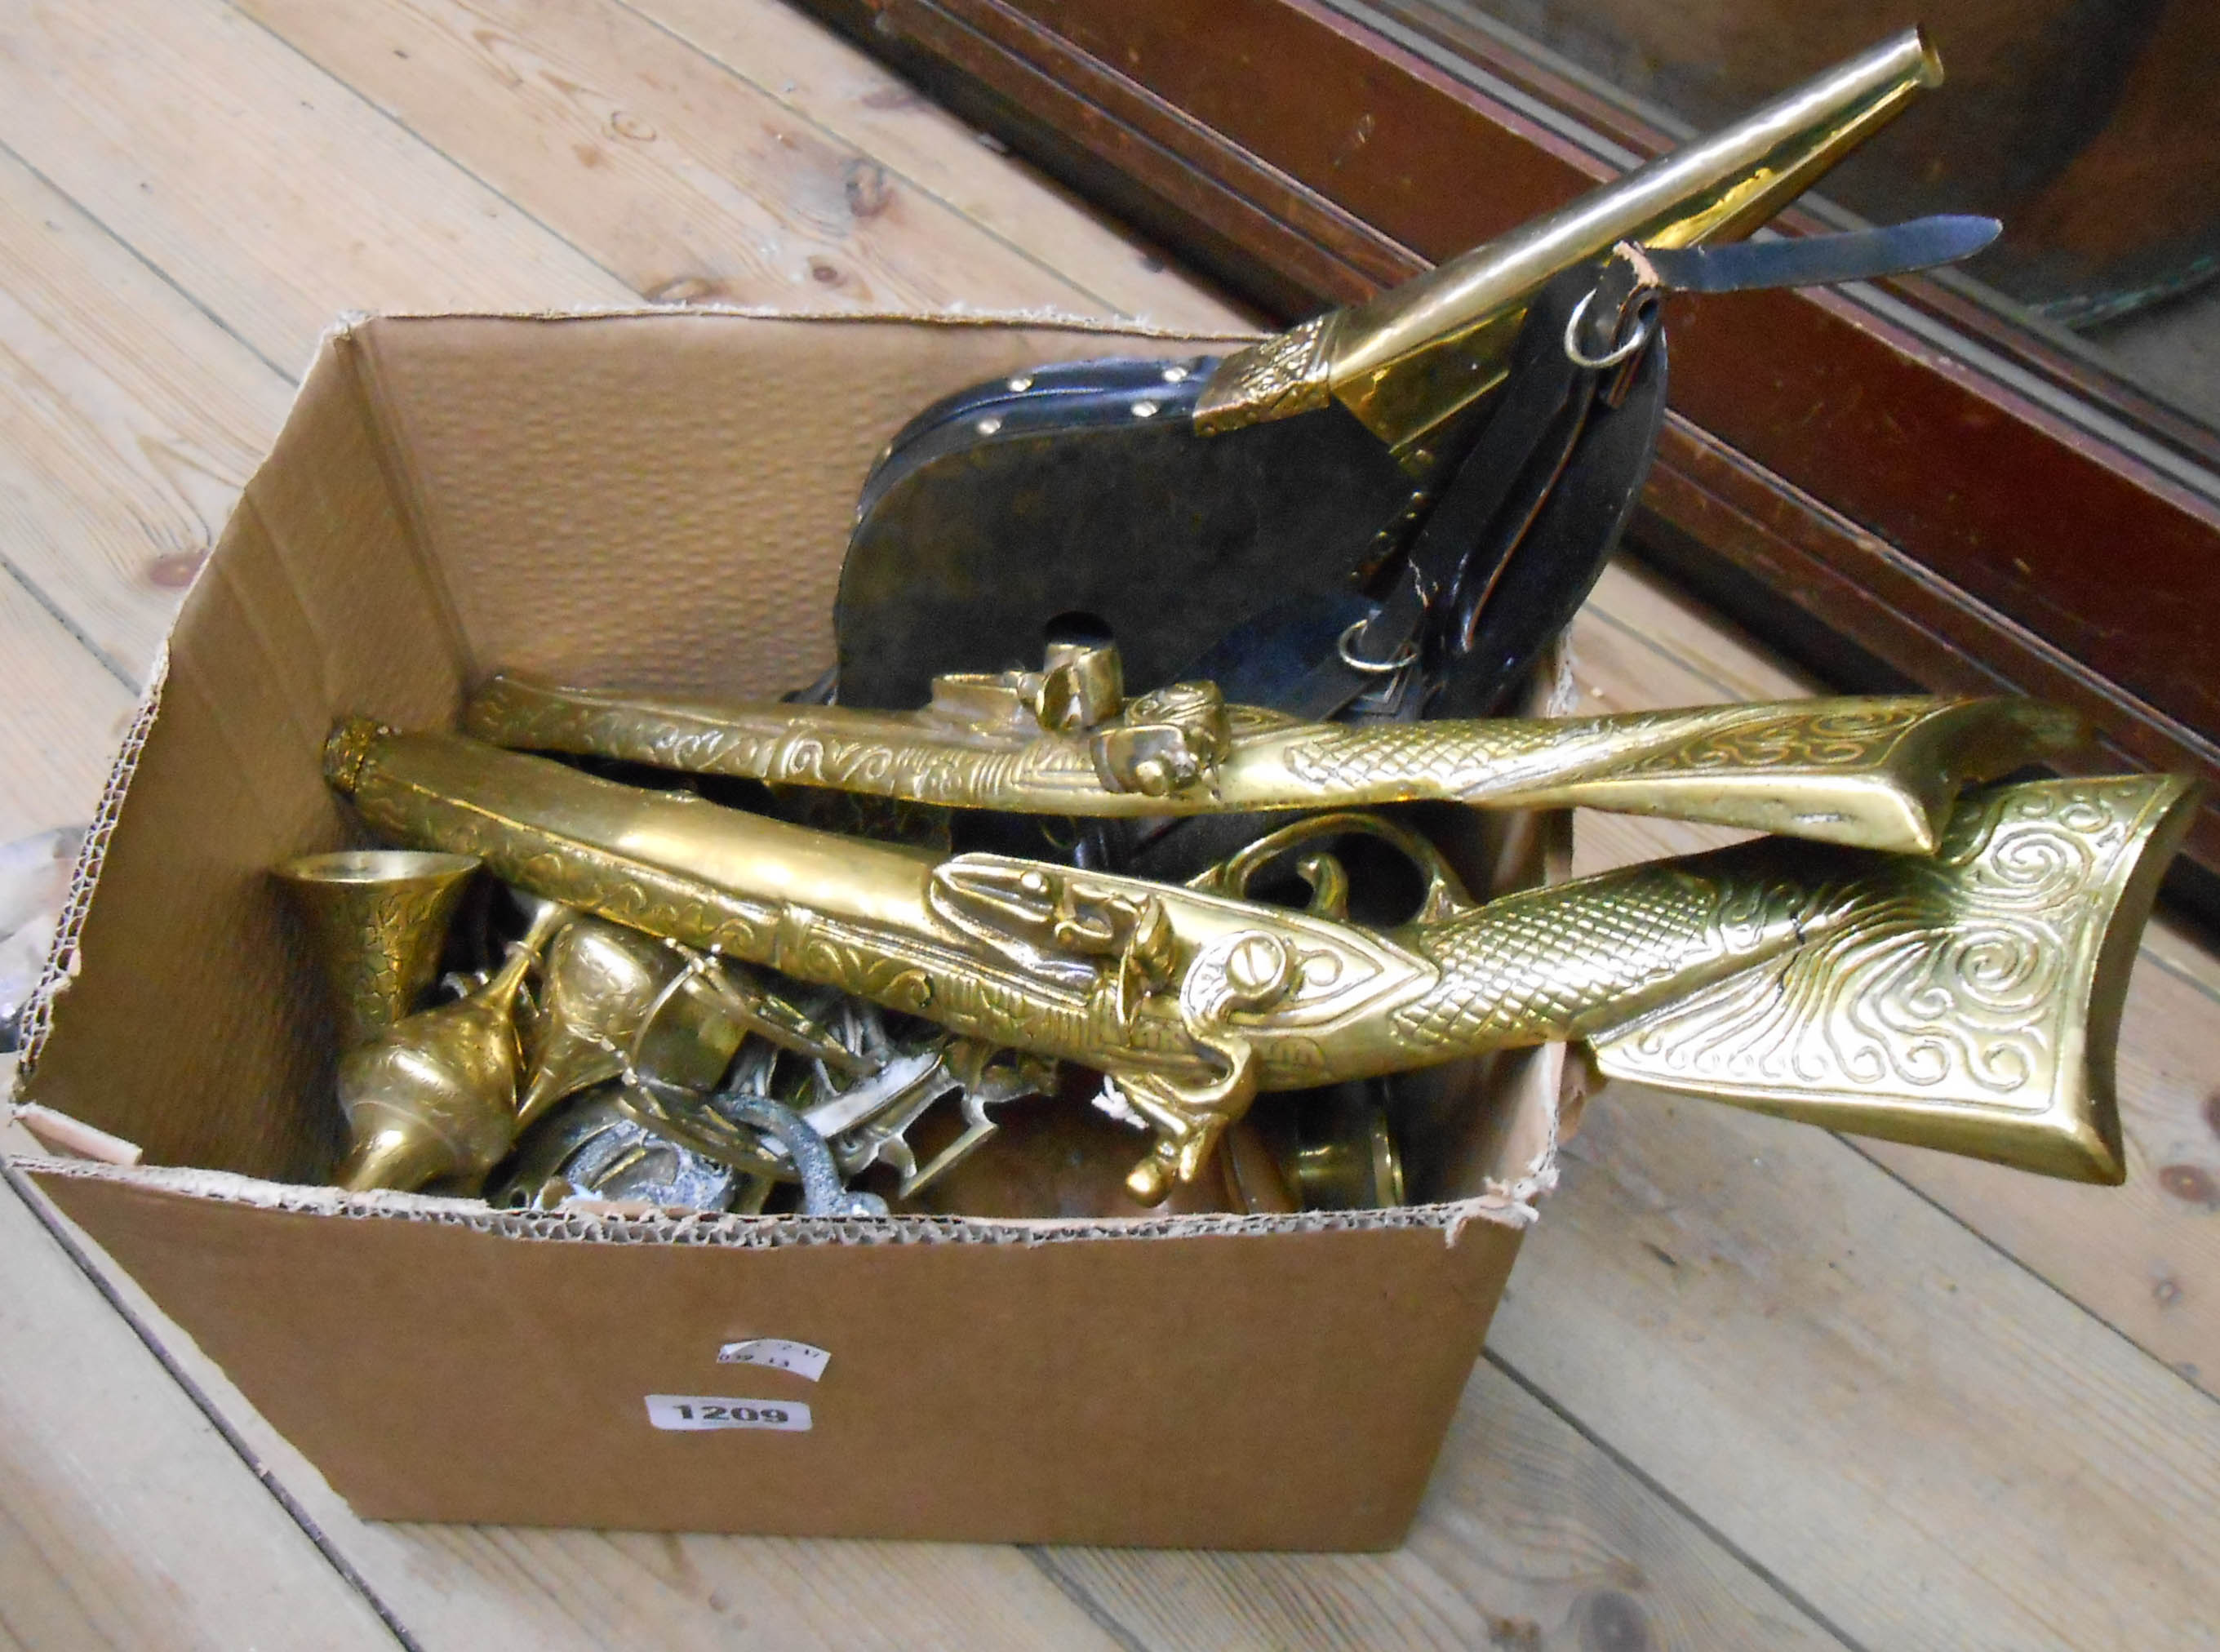 A box containing a quantity of brassware including vases, candlesticks, bellows, etc.